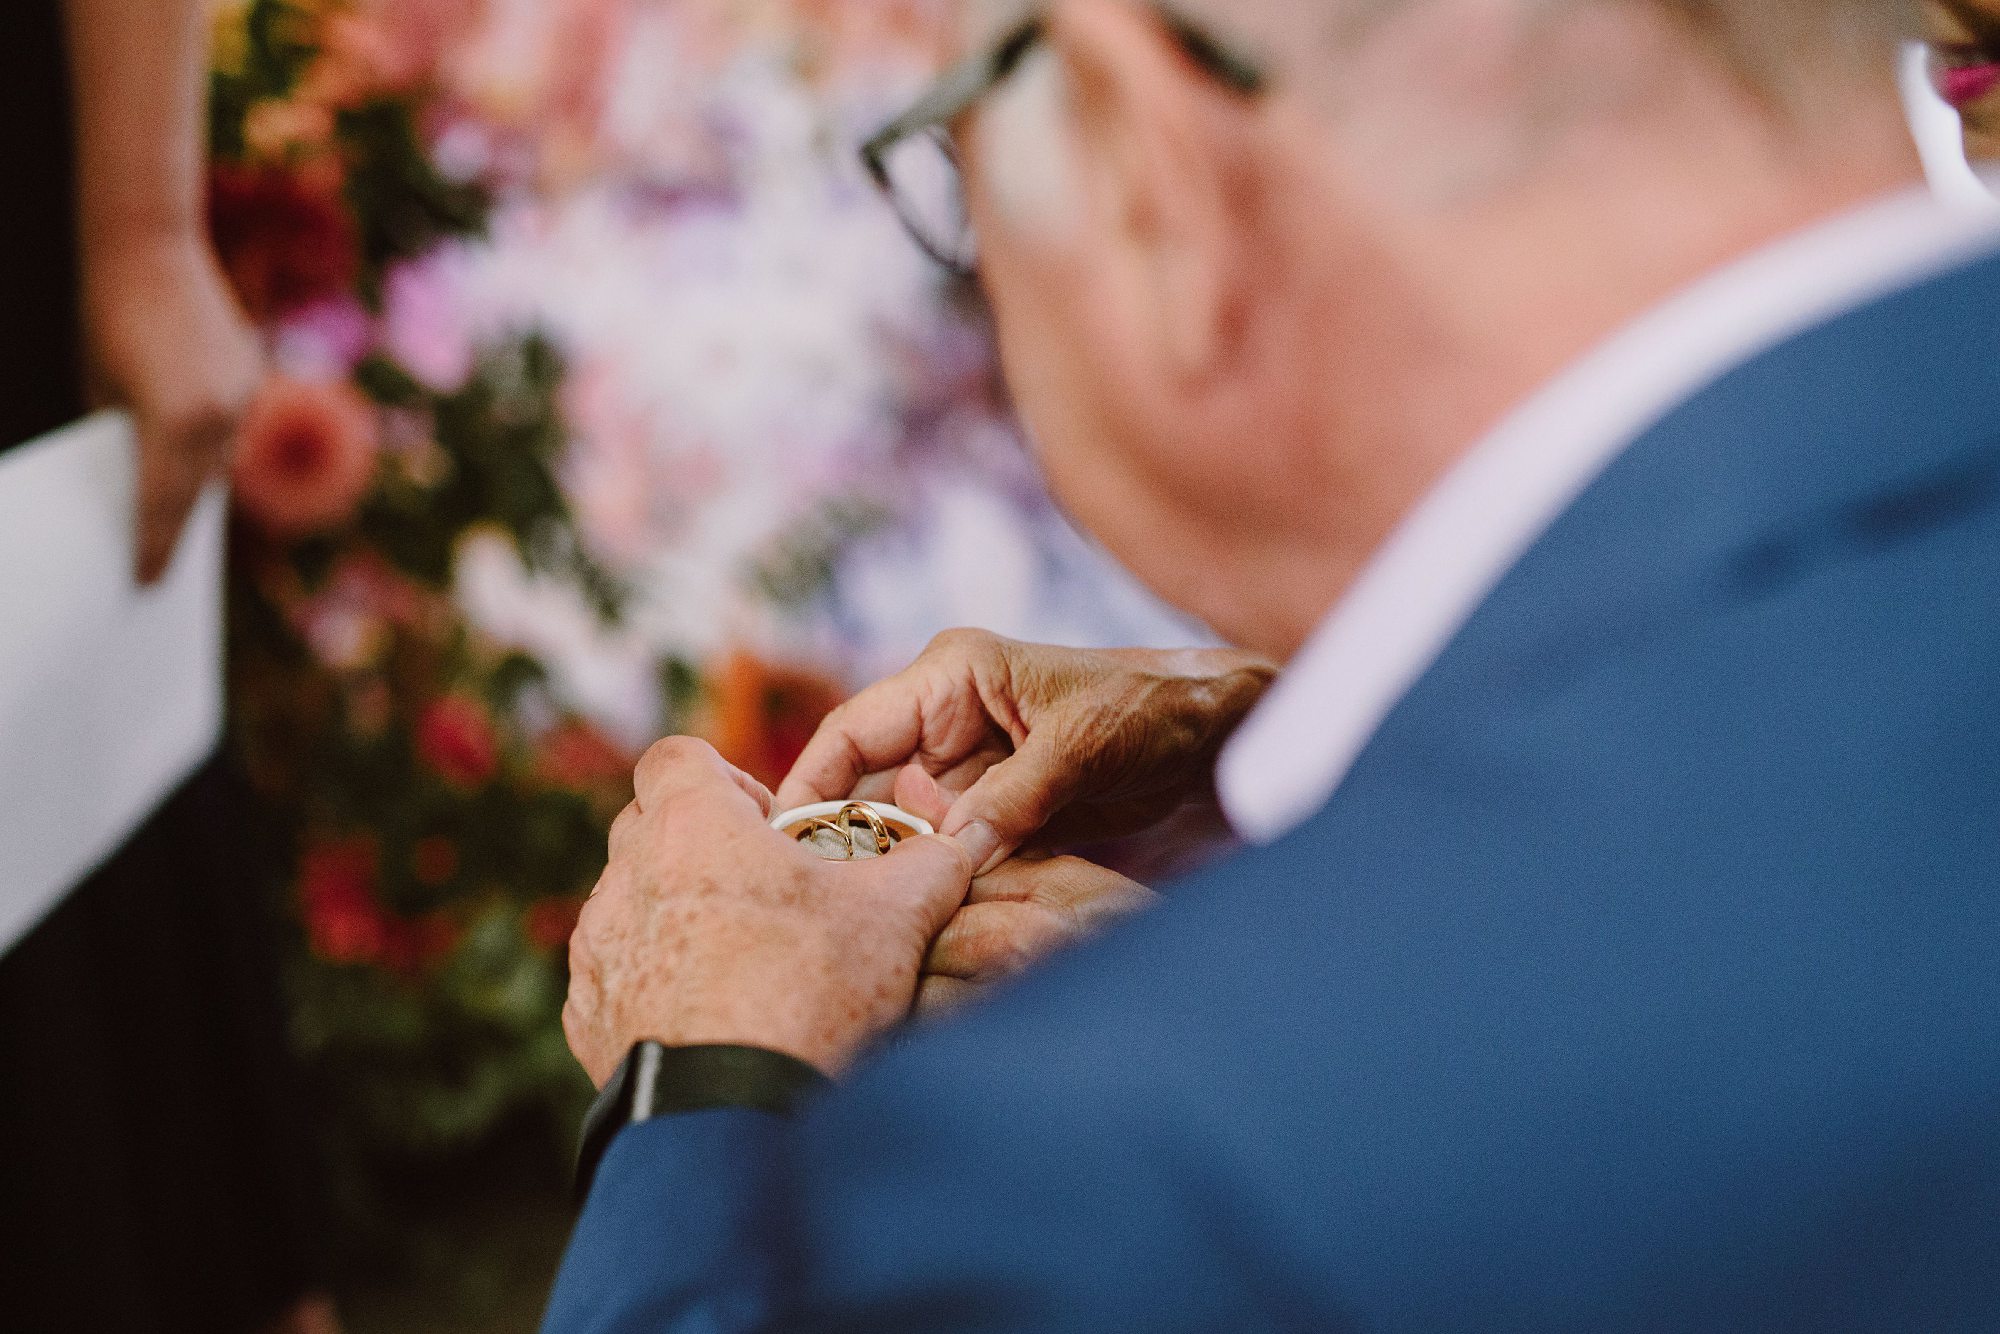 Elderly wedding guest holding rings while blessing them